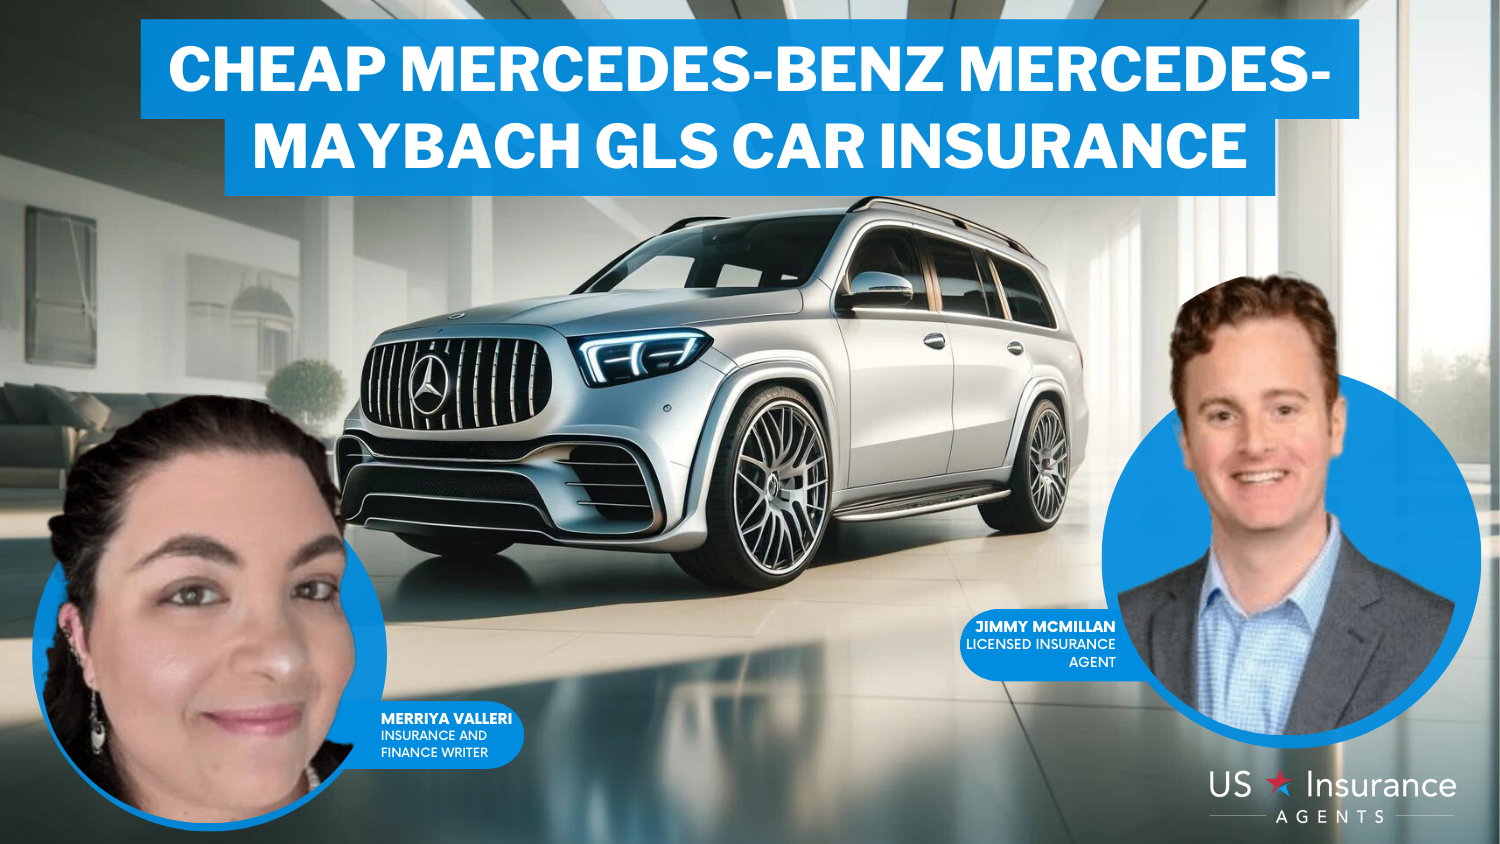 Cheap Mercedes-Benz Mercedes-Maybach GLS Car Insurance: USAA, Auto-Owners, and The Hartford